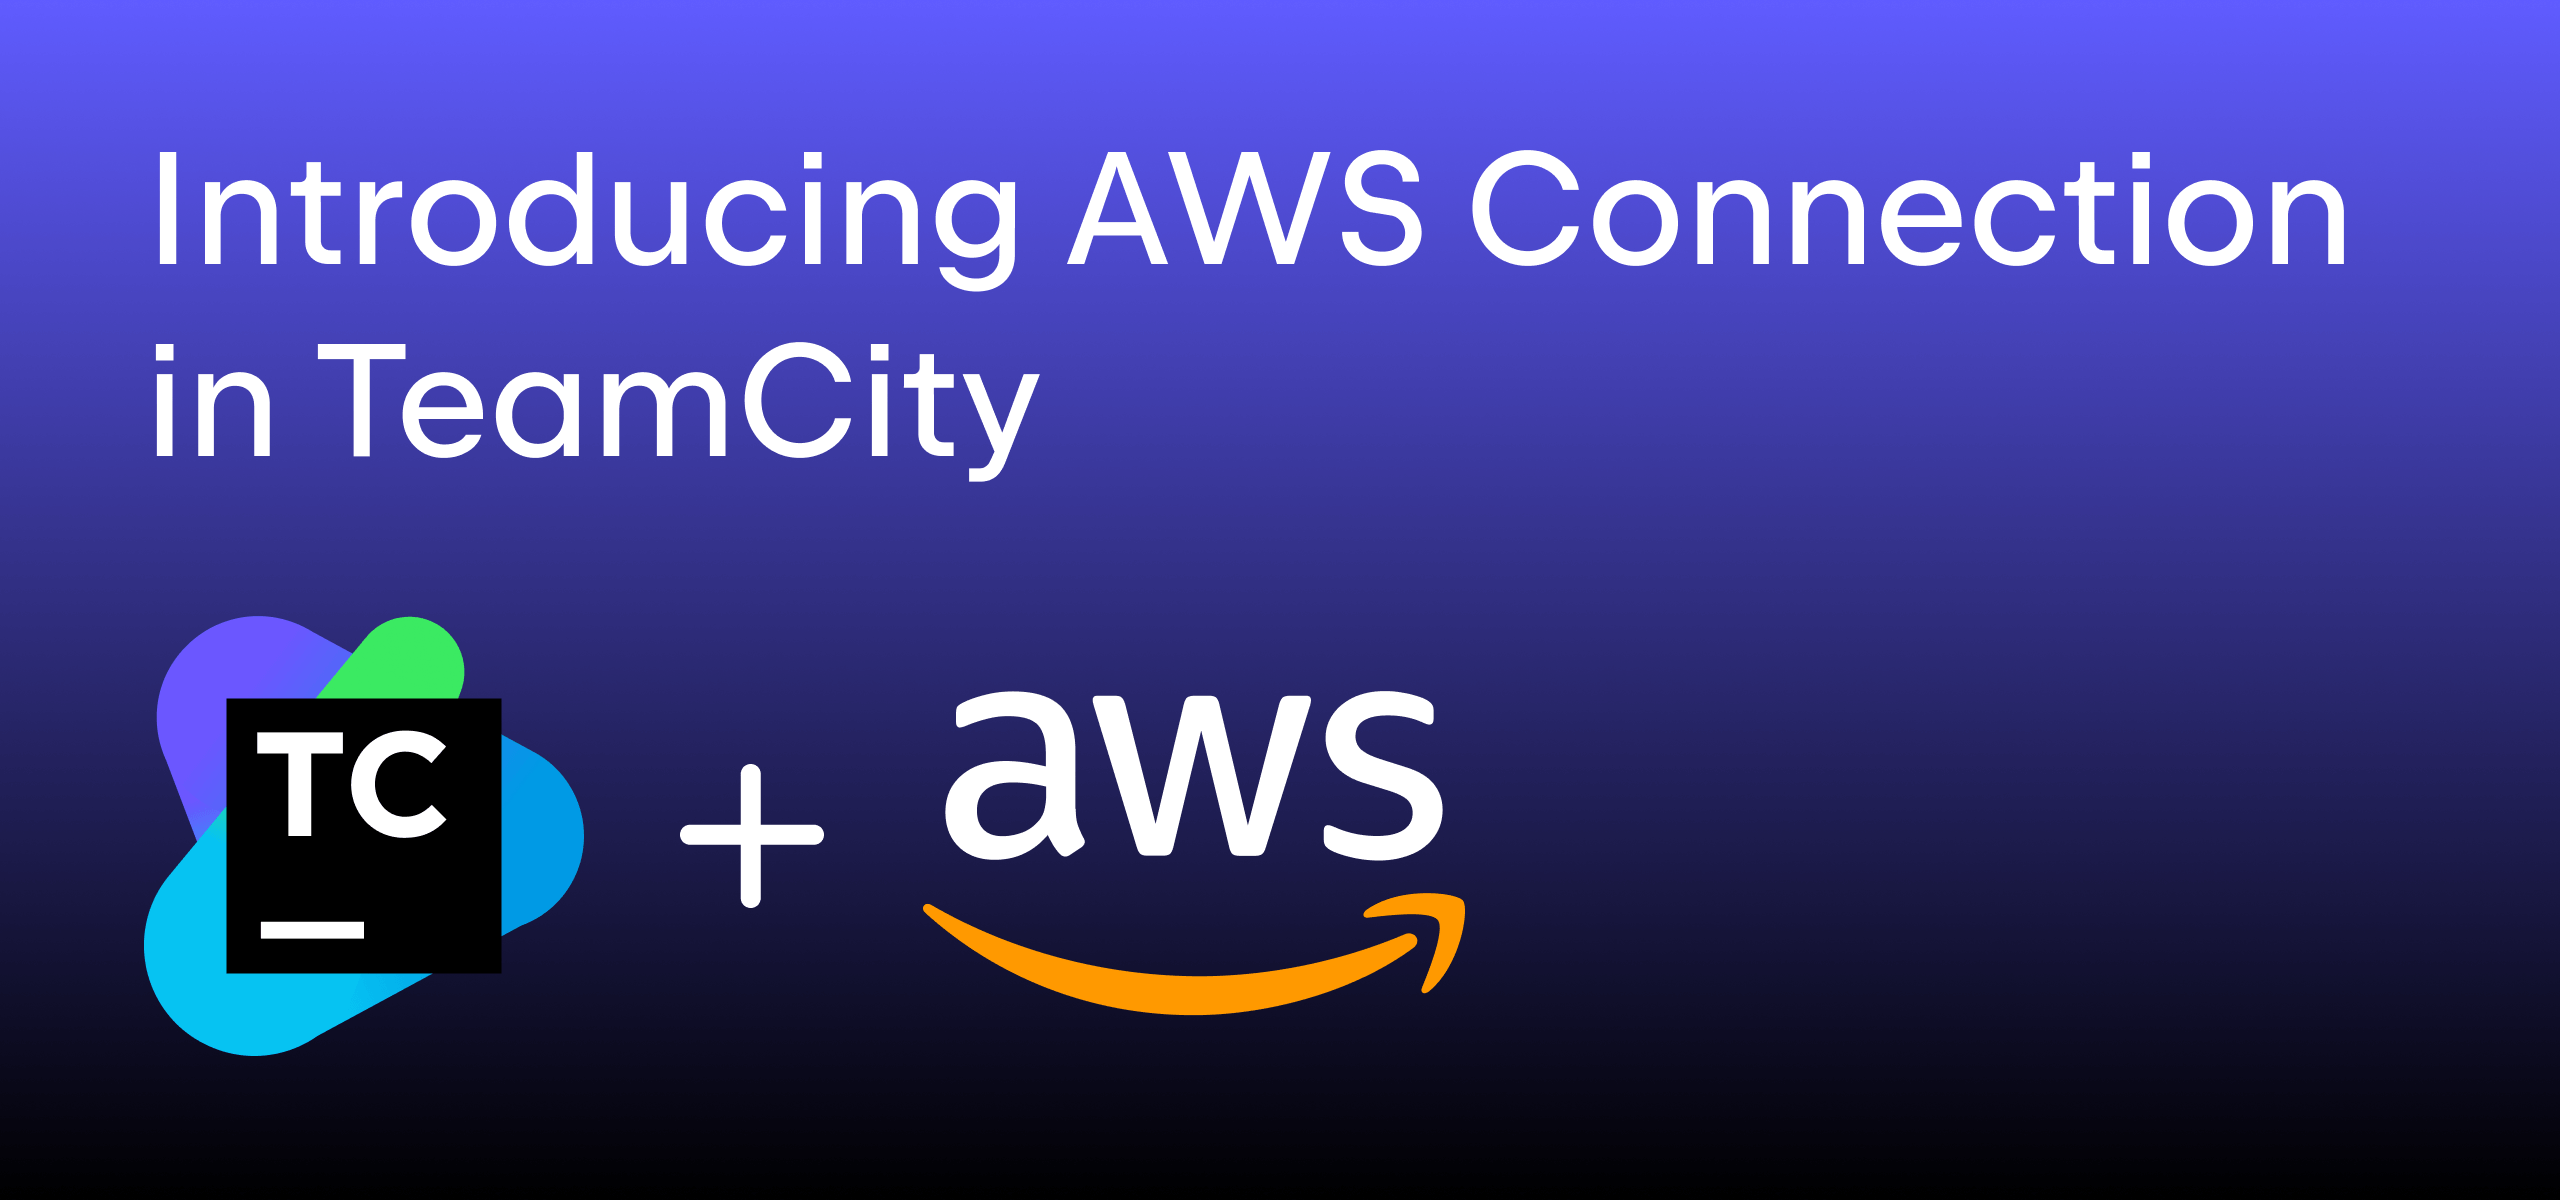 Introducing AWS Connection